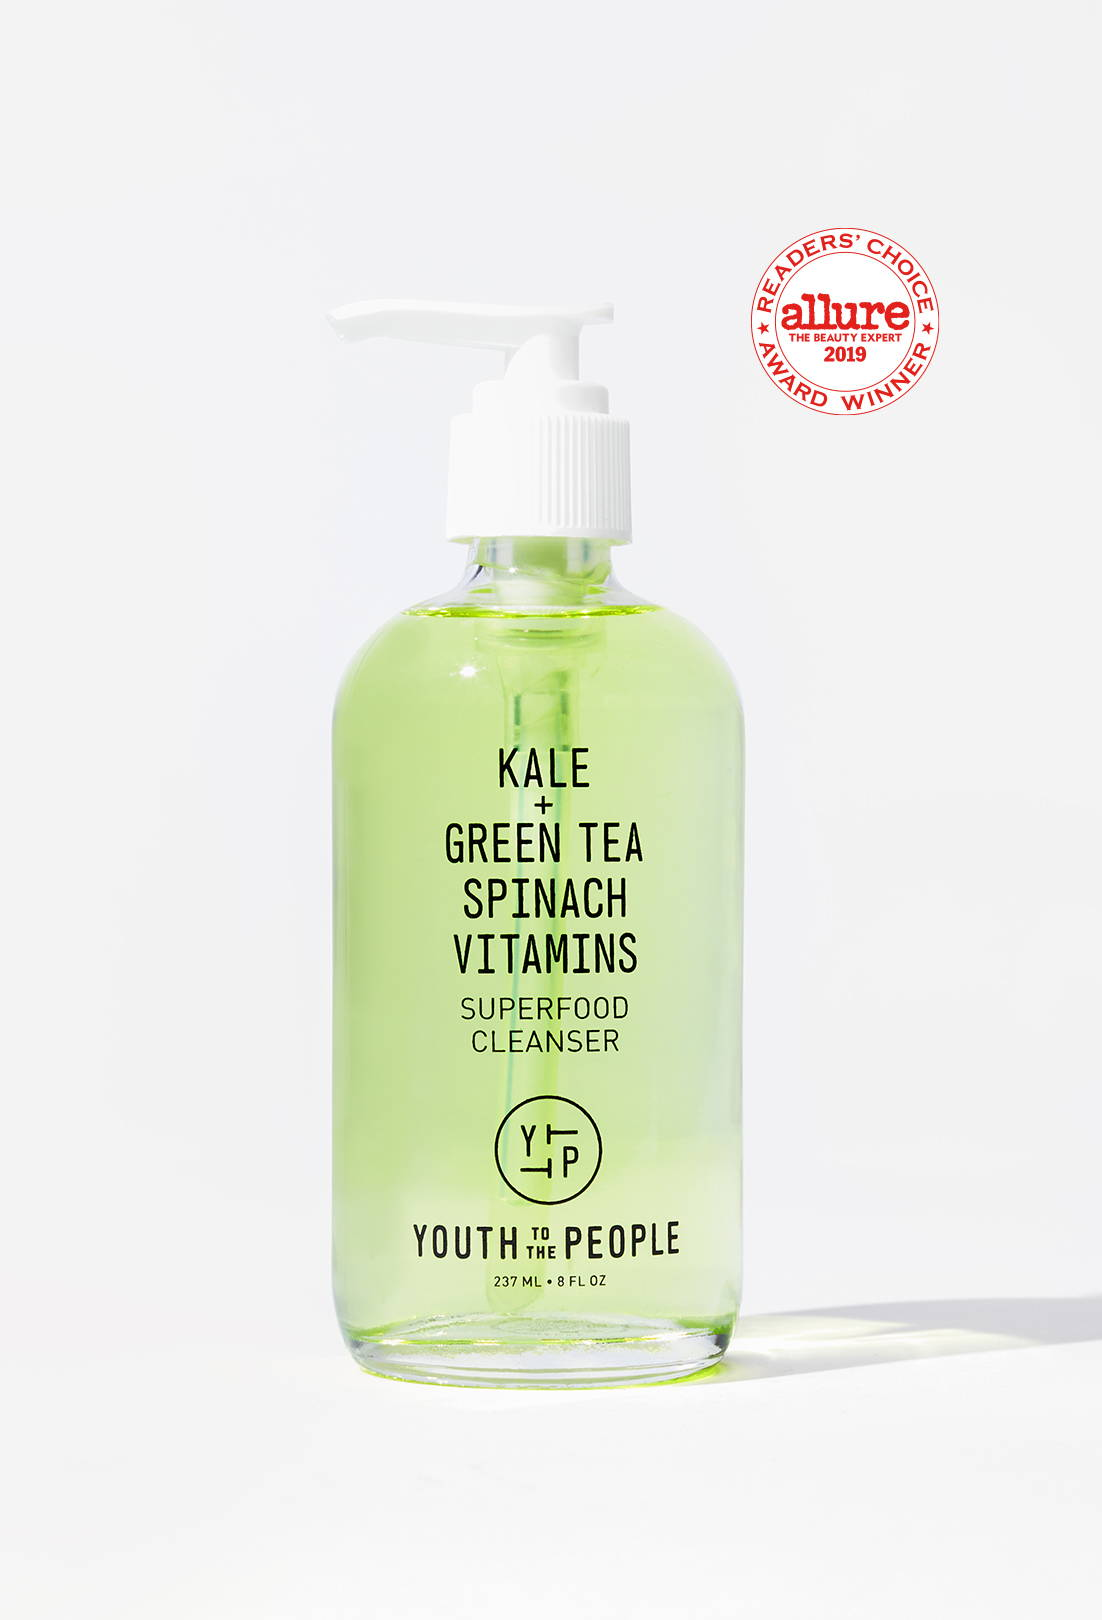 Youth to The People Superfood Cleanser